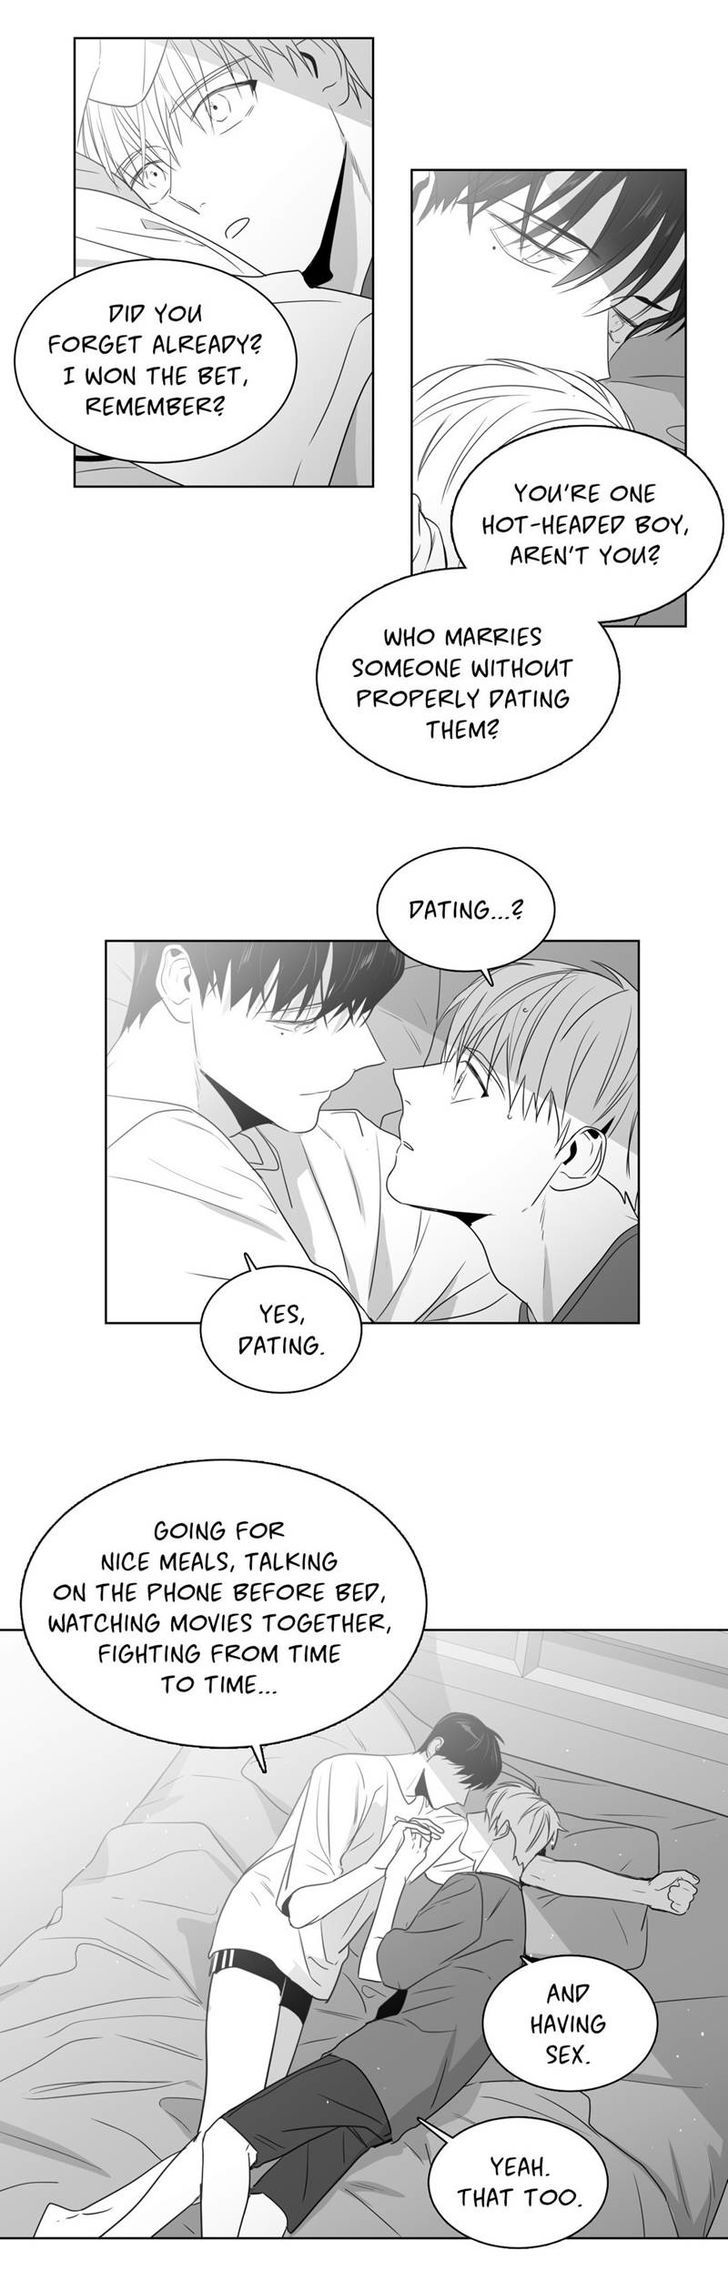 Lover Boy (Lezhin) Chapter 040 page 12